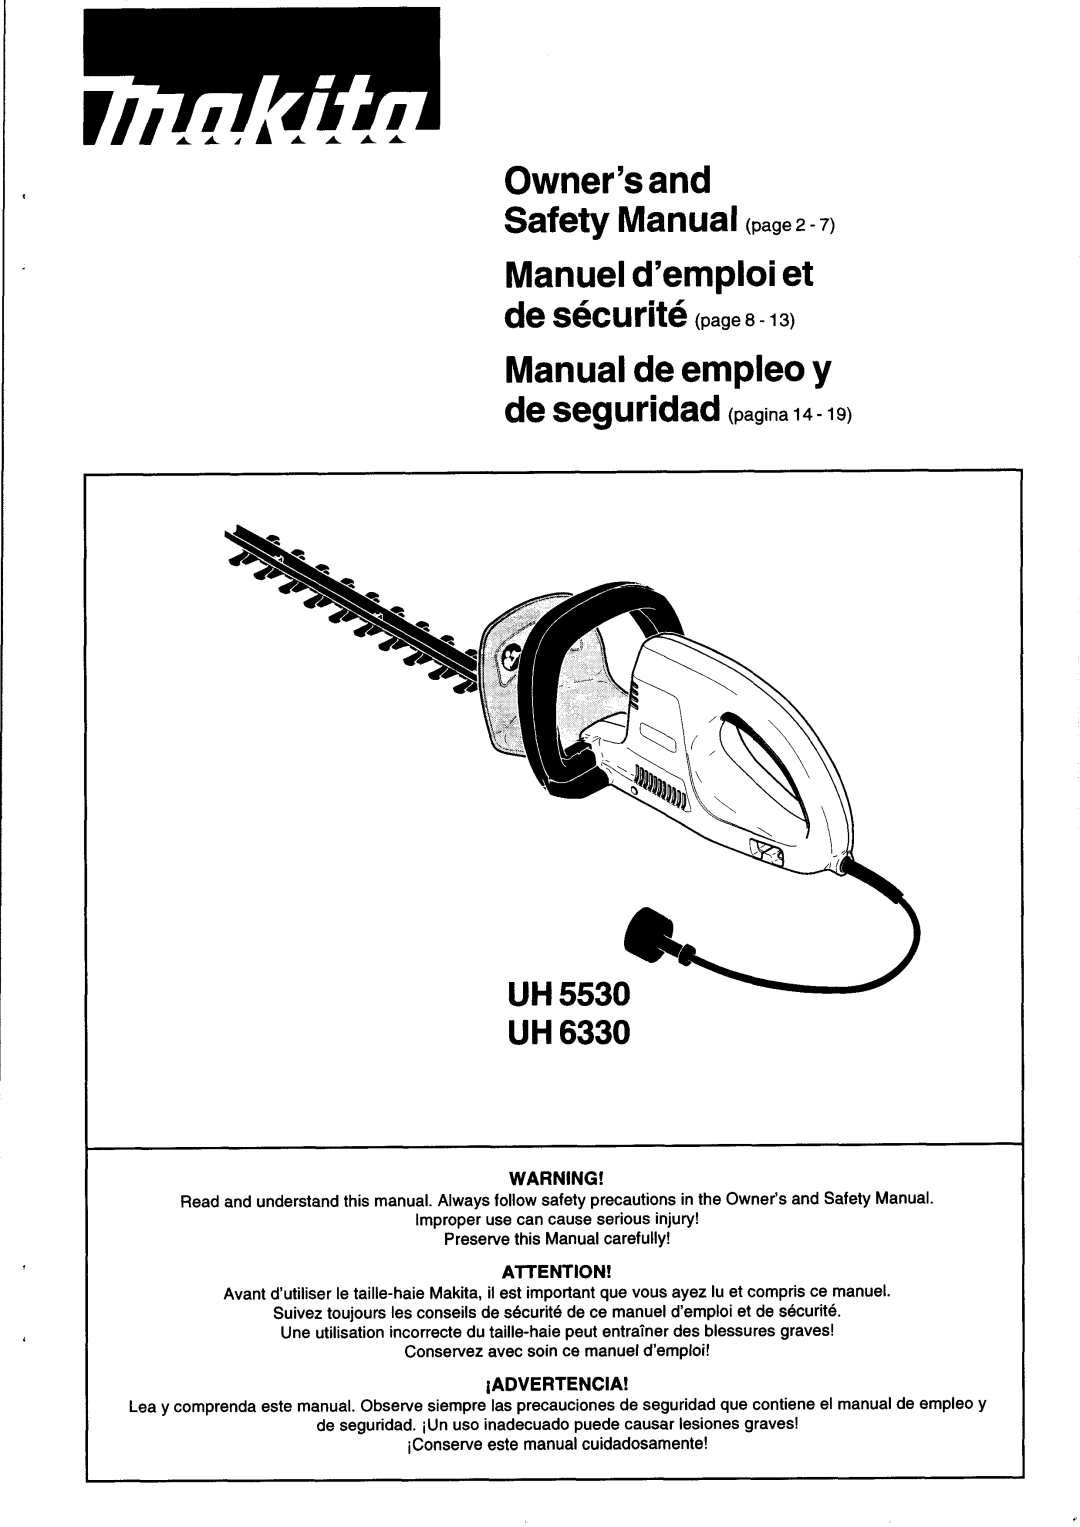 Makita UH6330 manual UH5530ed UH, Iadvertencia, Owner’sand Safety Manualpage, Manueld’emploiet de SeCUrite page 8 